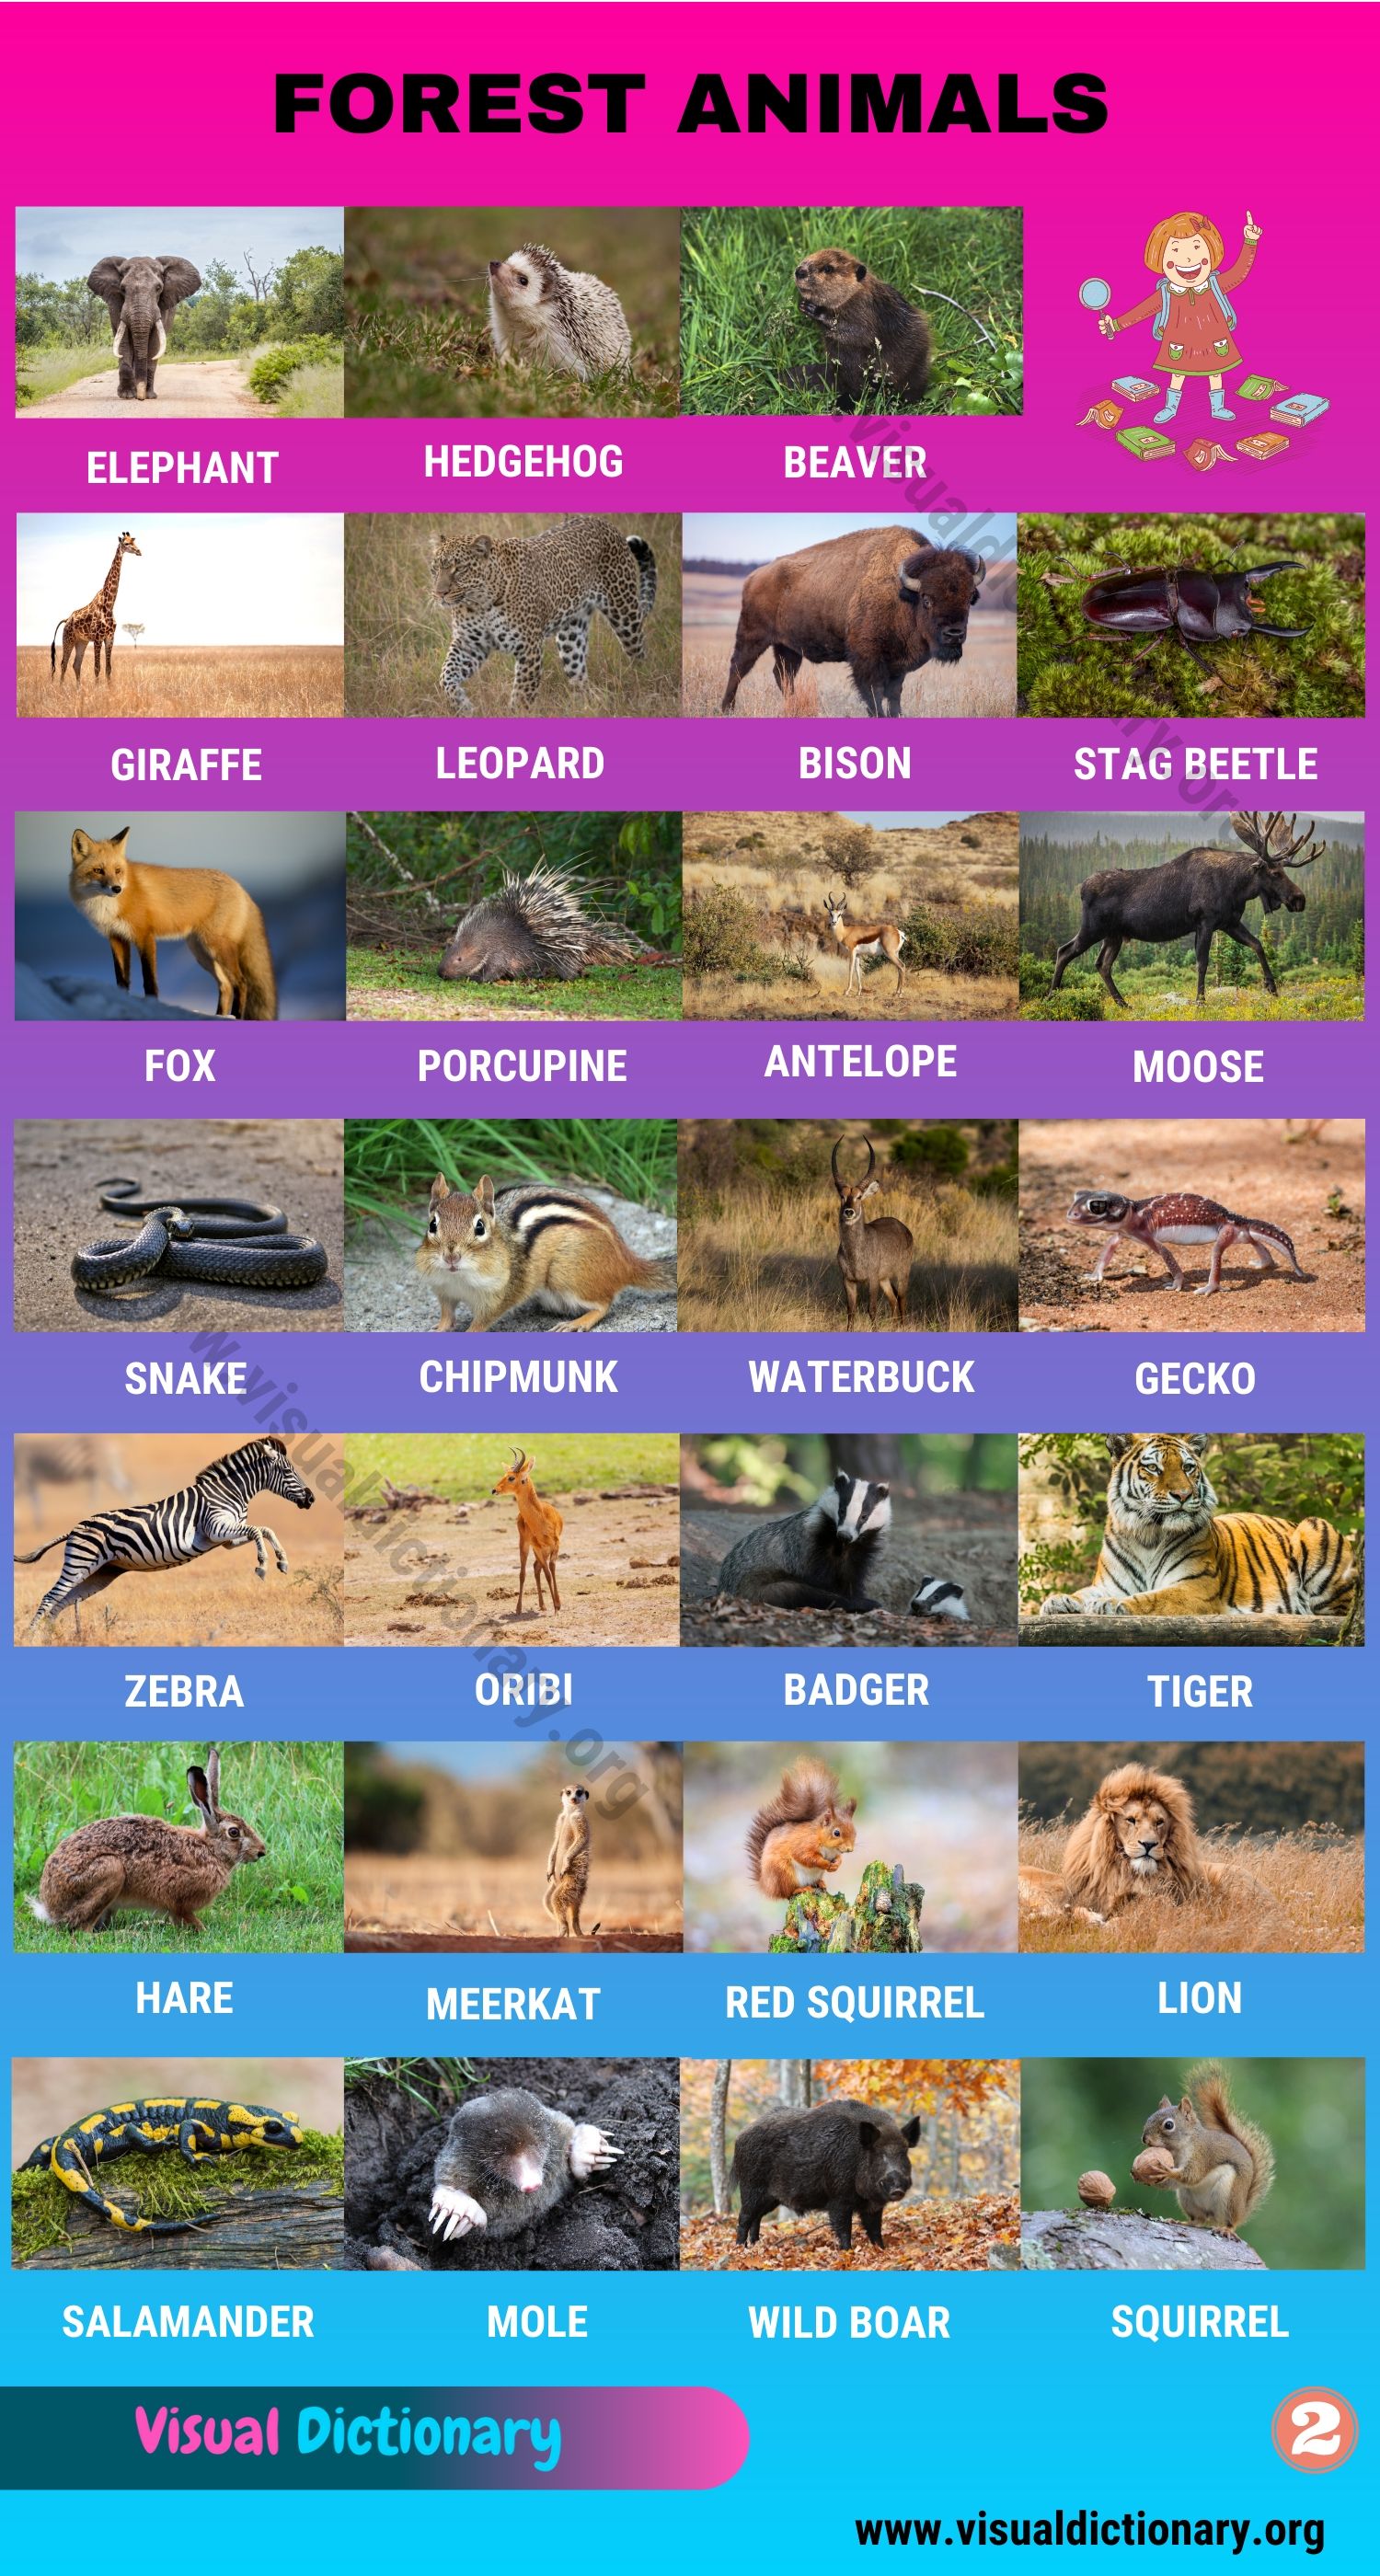 Forest Animals: Helpful List of 55 Different Animals Living in the Forest -  Visual Dictionary